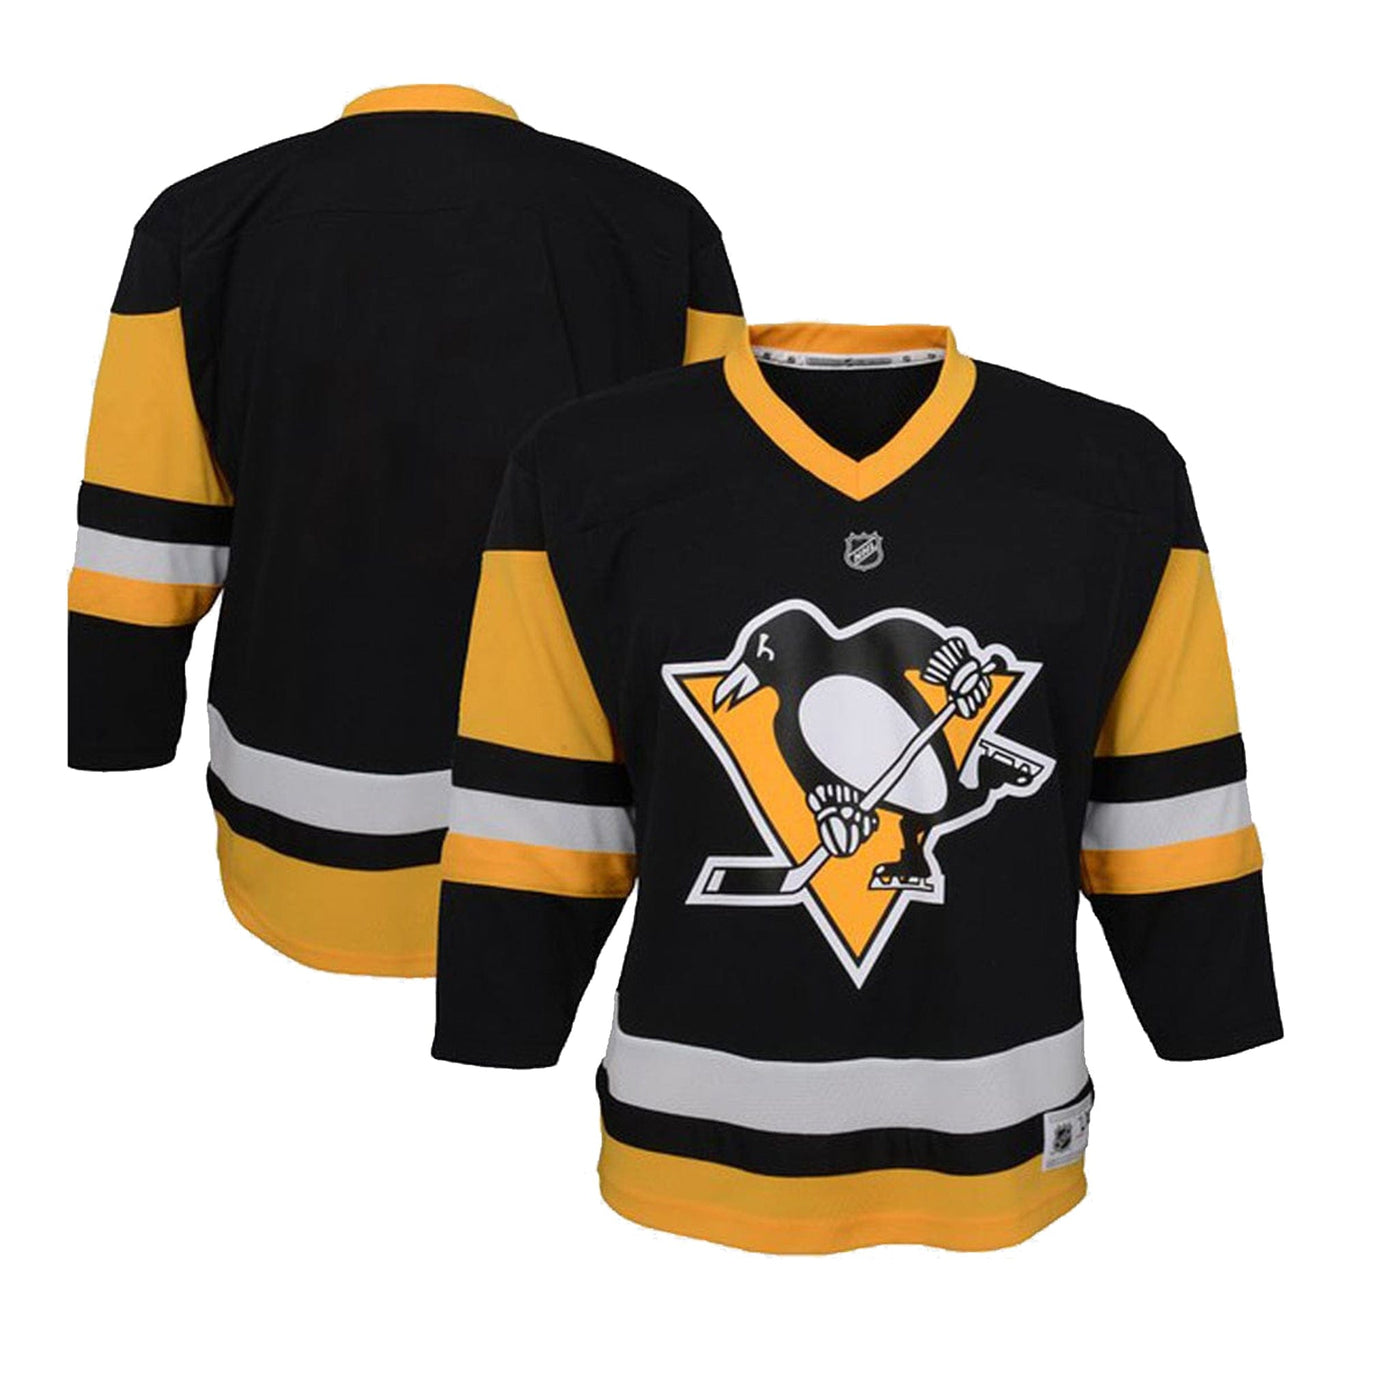 Pittsburgh Penguins Home Outer Stuff Replica Youth Jersey - The Hockey Shop Source For Sports